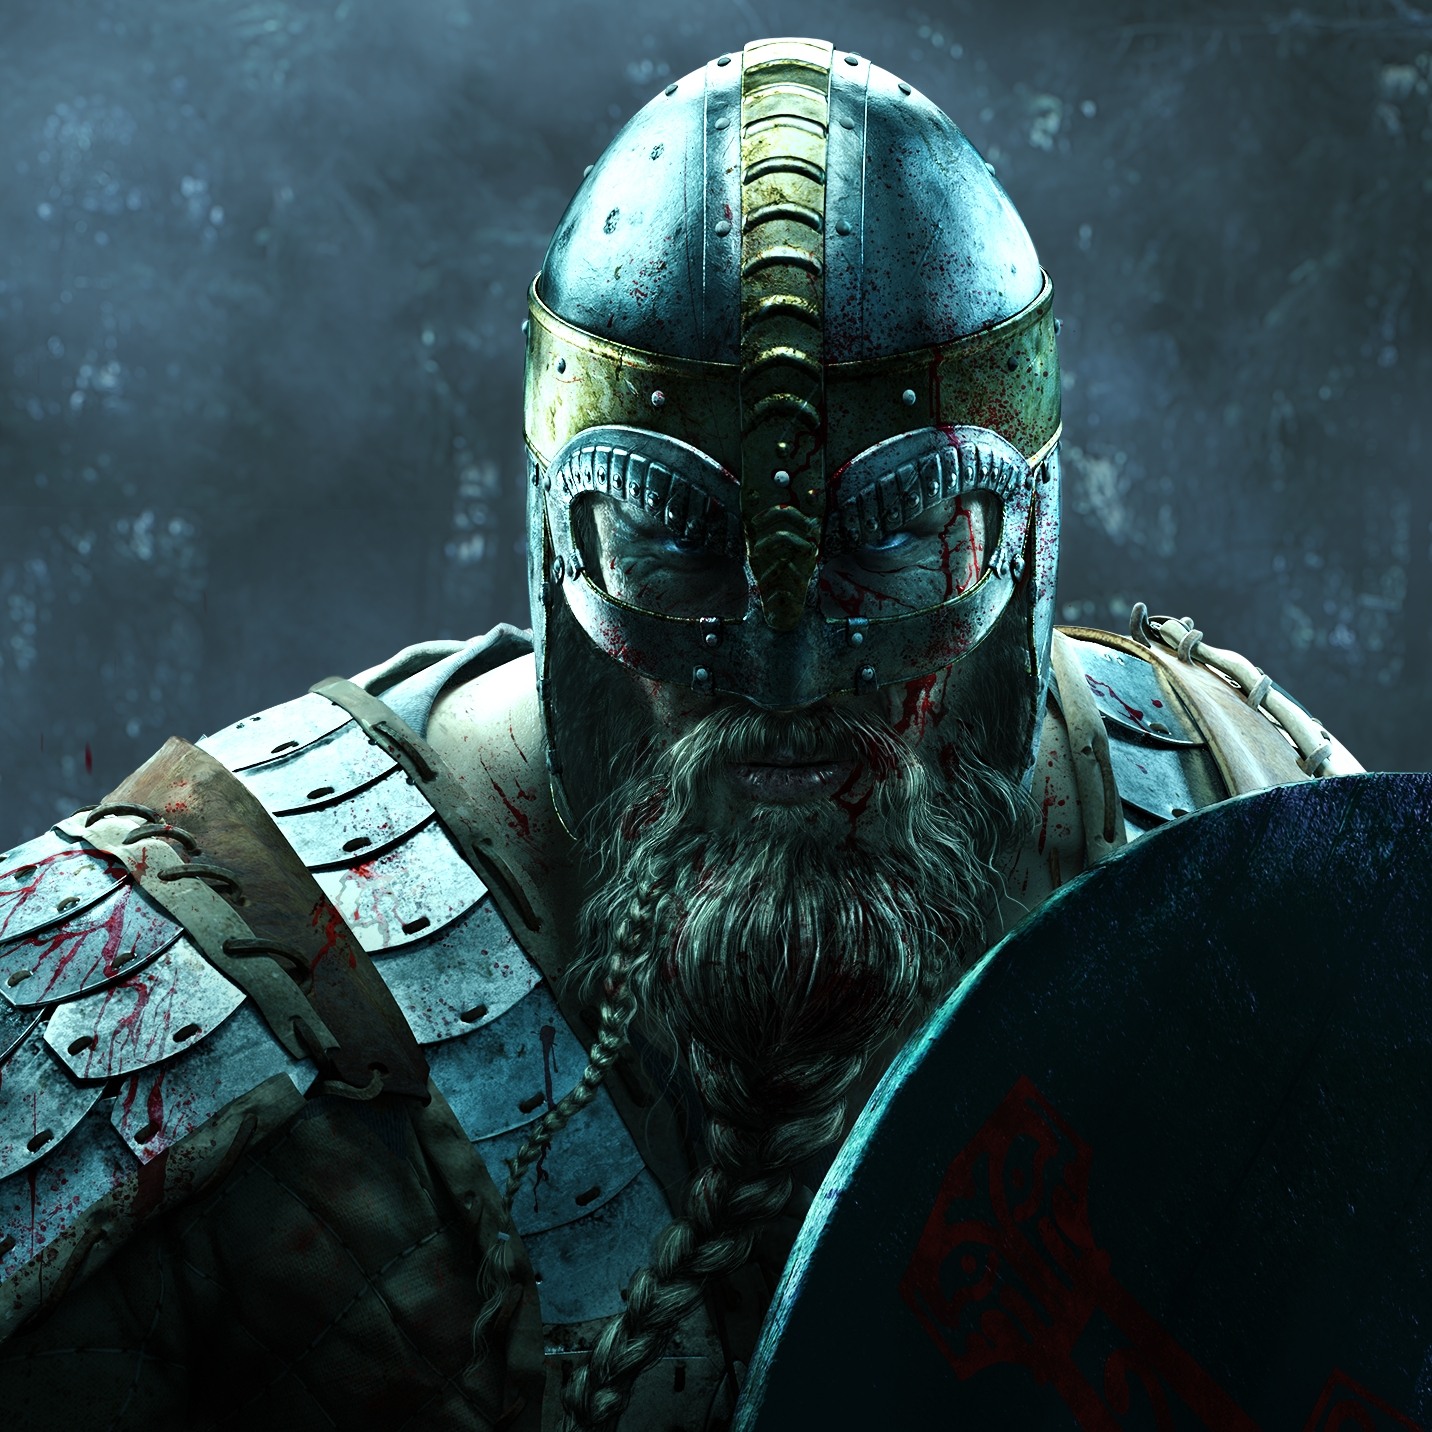 War Of The Vikings Backgrounds, Compatible - PC, Mobile, Gadgets| 1432x1432 px